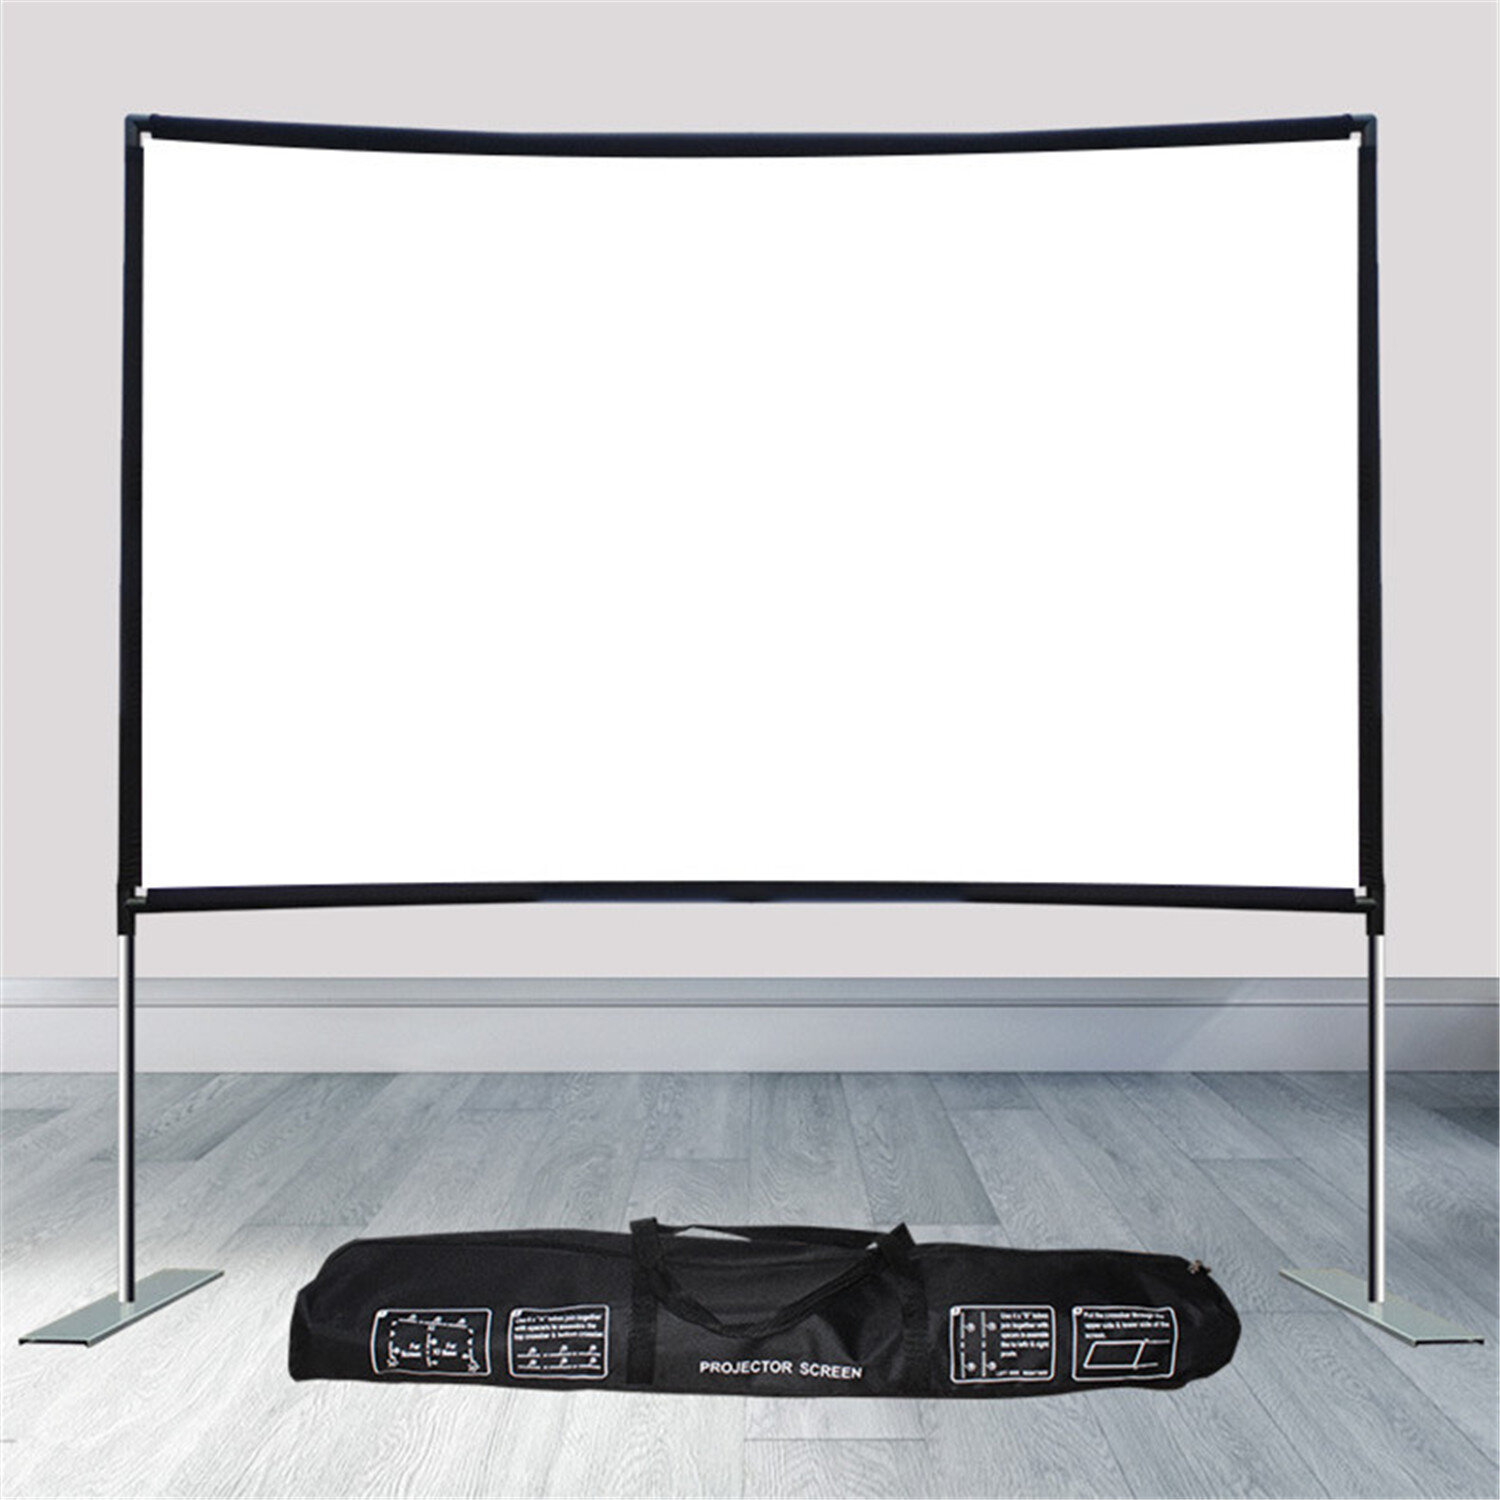 HD Projector Screen 16:9Home Cinema Theater Projection Portable Screen ProjectoR 